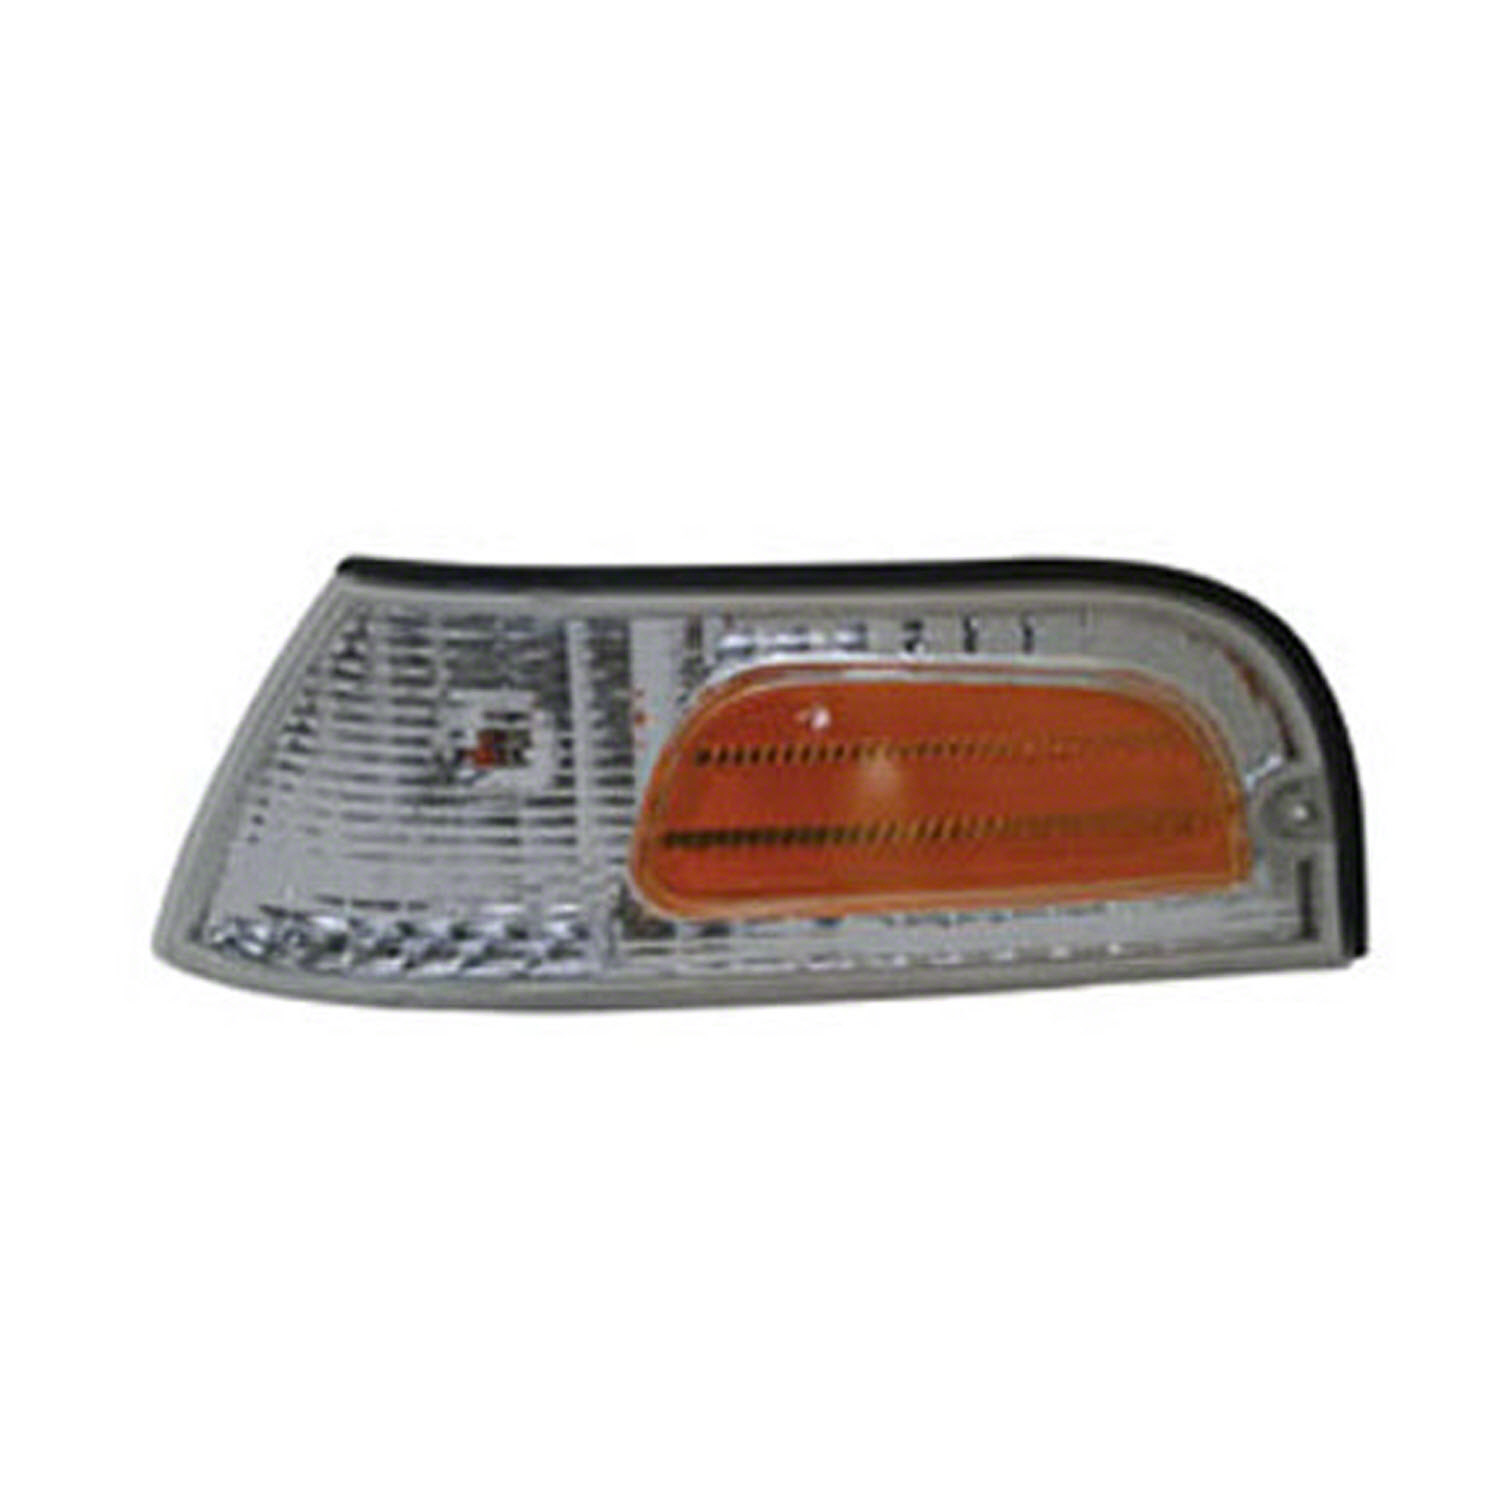 GetAllParts Aftermarket 1998-2000 Ford Crown Victoria  Driver Side Left Parking and Side Marker Lamp XW7Z15A201BB